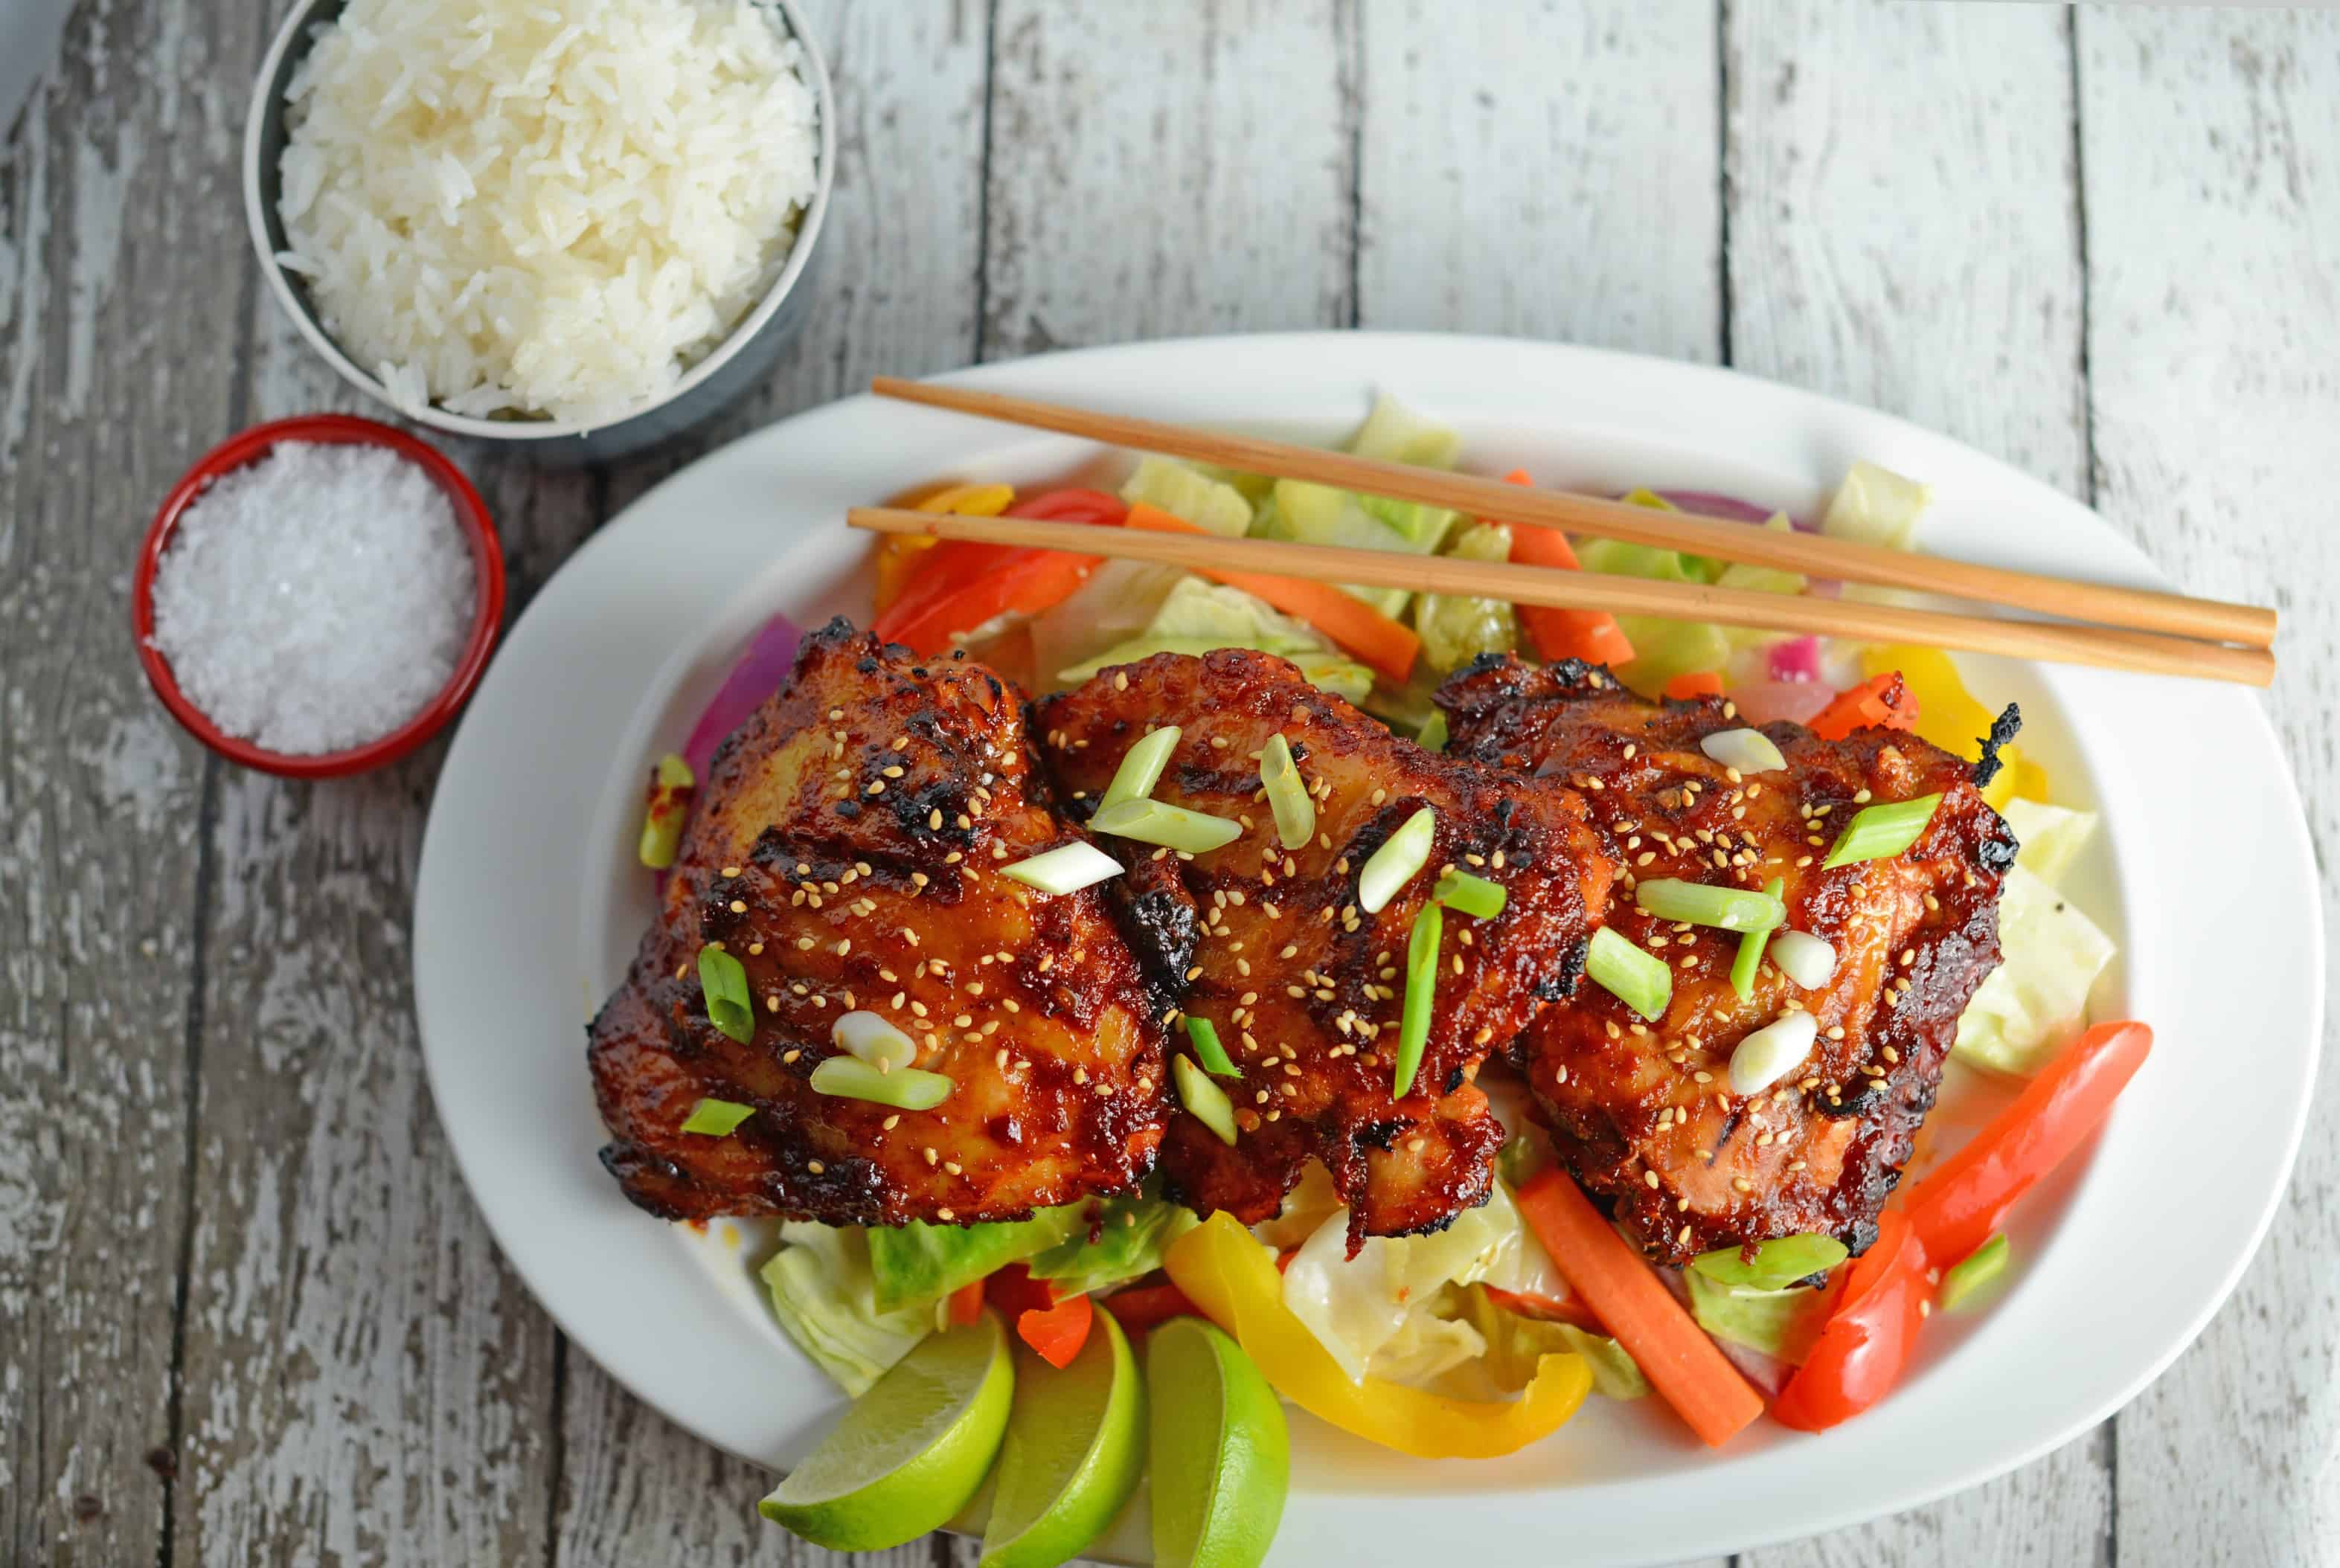 Spicy Korean BBQ Chicken Recipe- this SPICY marinade is the same as you get at your favorite Korean BBQ joint. Red chile pepper base with a sweet after taste. Great on the grill or in stir fry. www.savoryexperiments.com